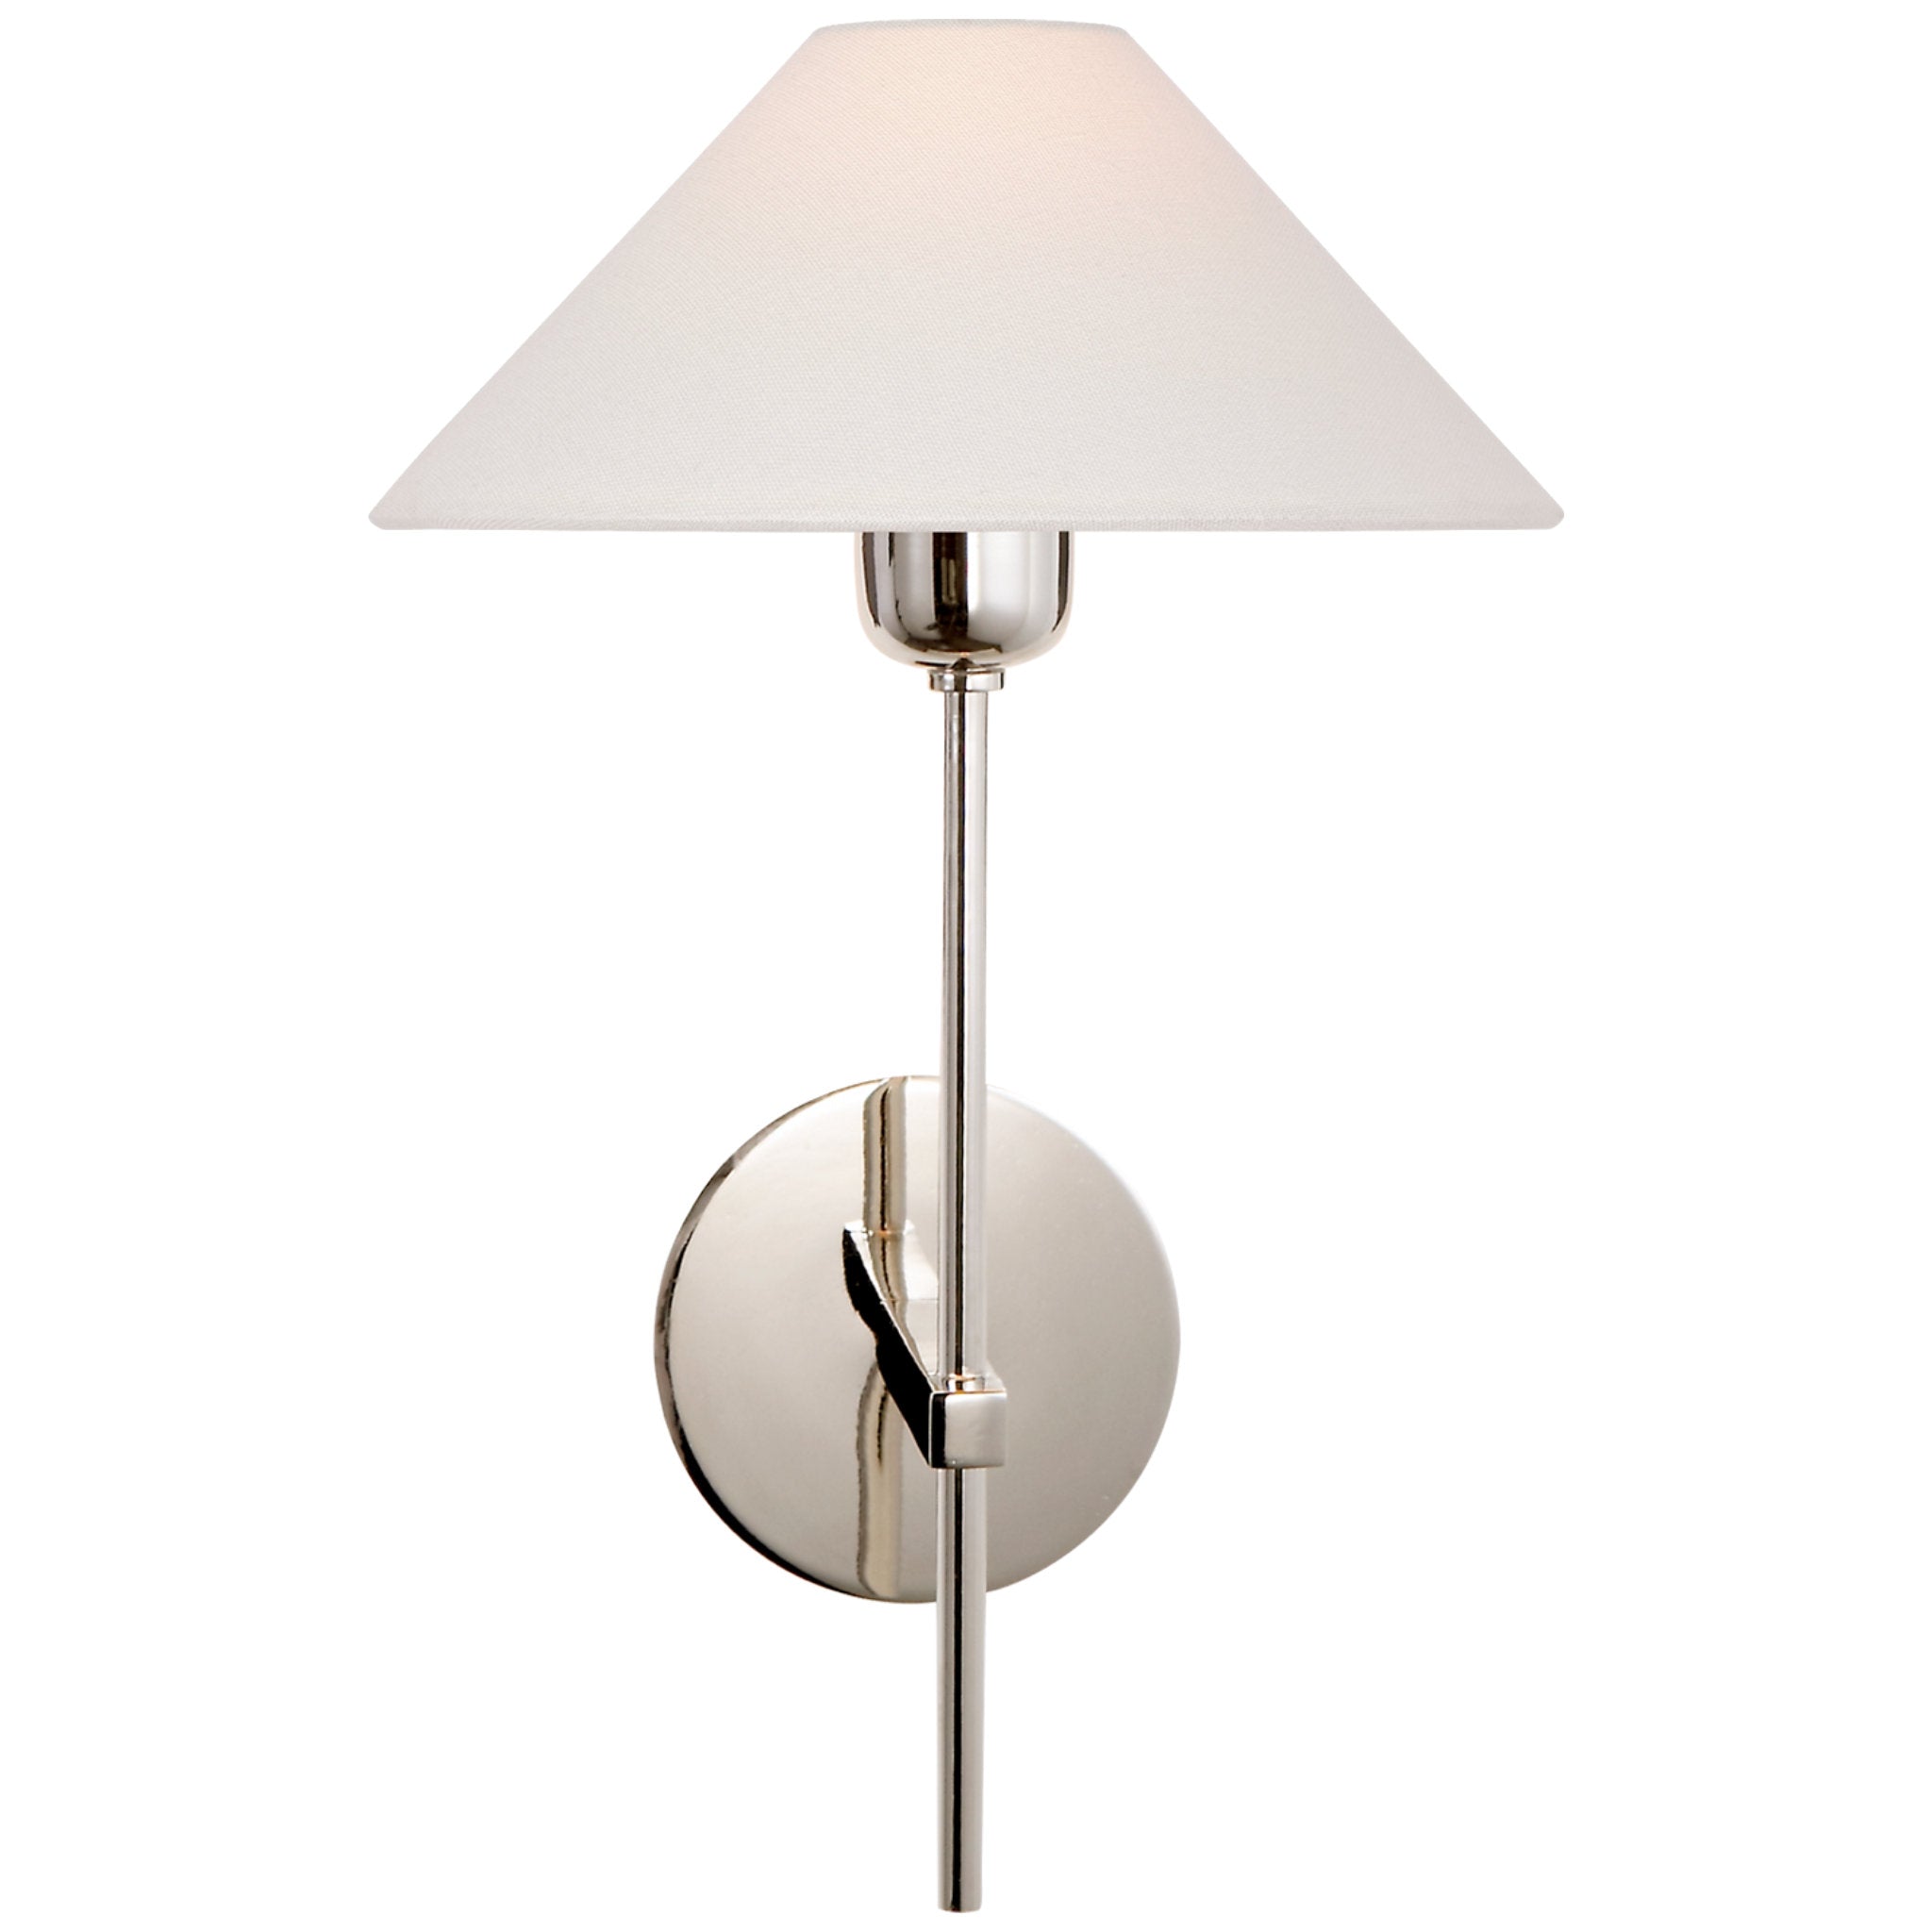 J. Randall Powers Hackney Single Sconce in Polished Nickel with Linen Shade